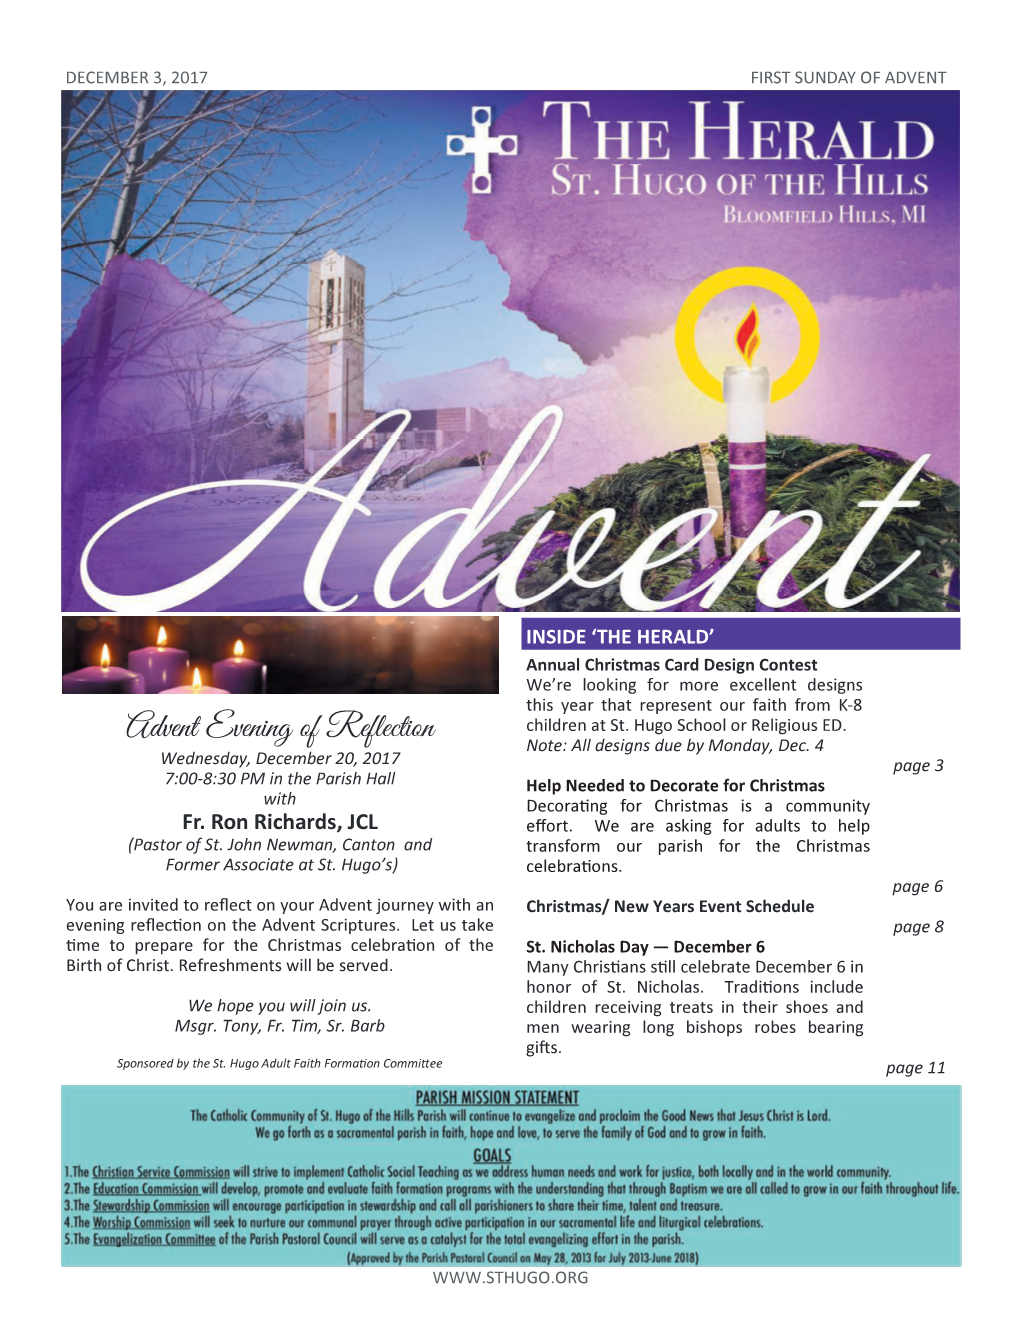 Advent Evening of Reflection Note: All Designs Due by Monday, Dec